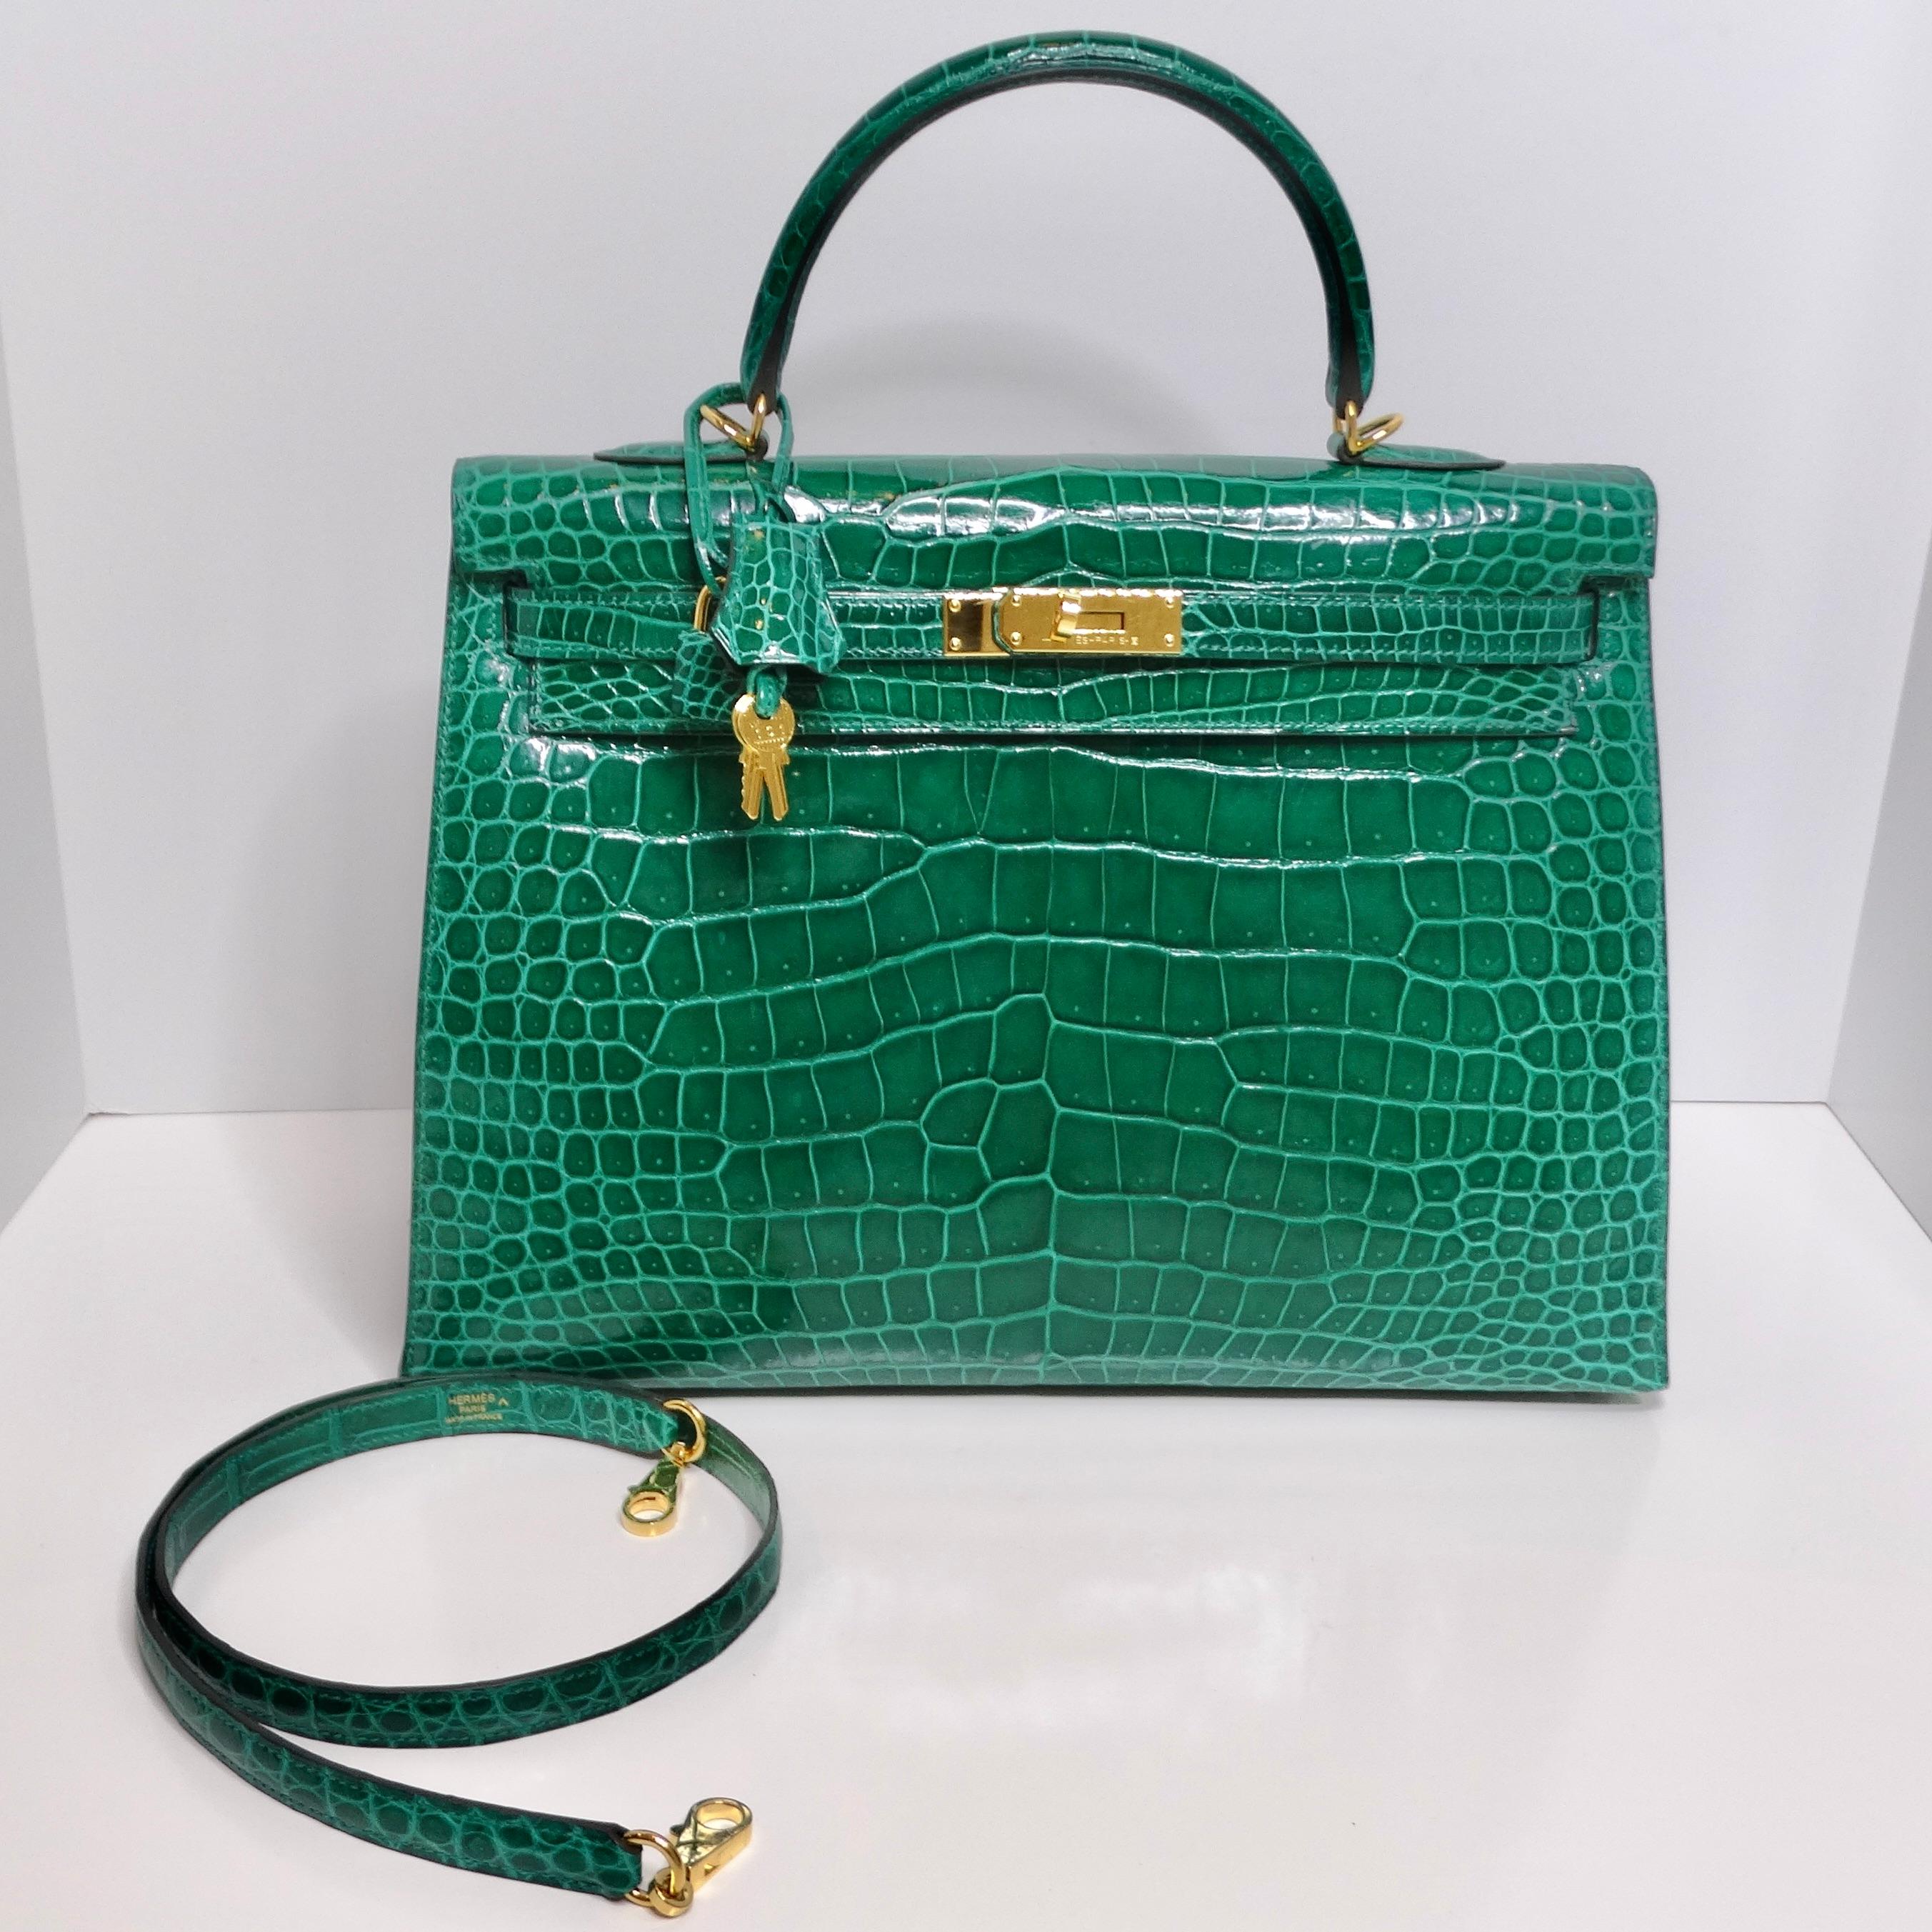 Introducing the epitome of luxury and sophistication, the Hermes Kelly 35 Malachite Shiny Crocodile Porosus Gold Hardware handbag. Crafted in 2018, this iconic handbag is a testament to Hermes' impeccable craftsmanship and timeless design.

This